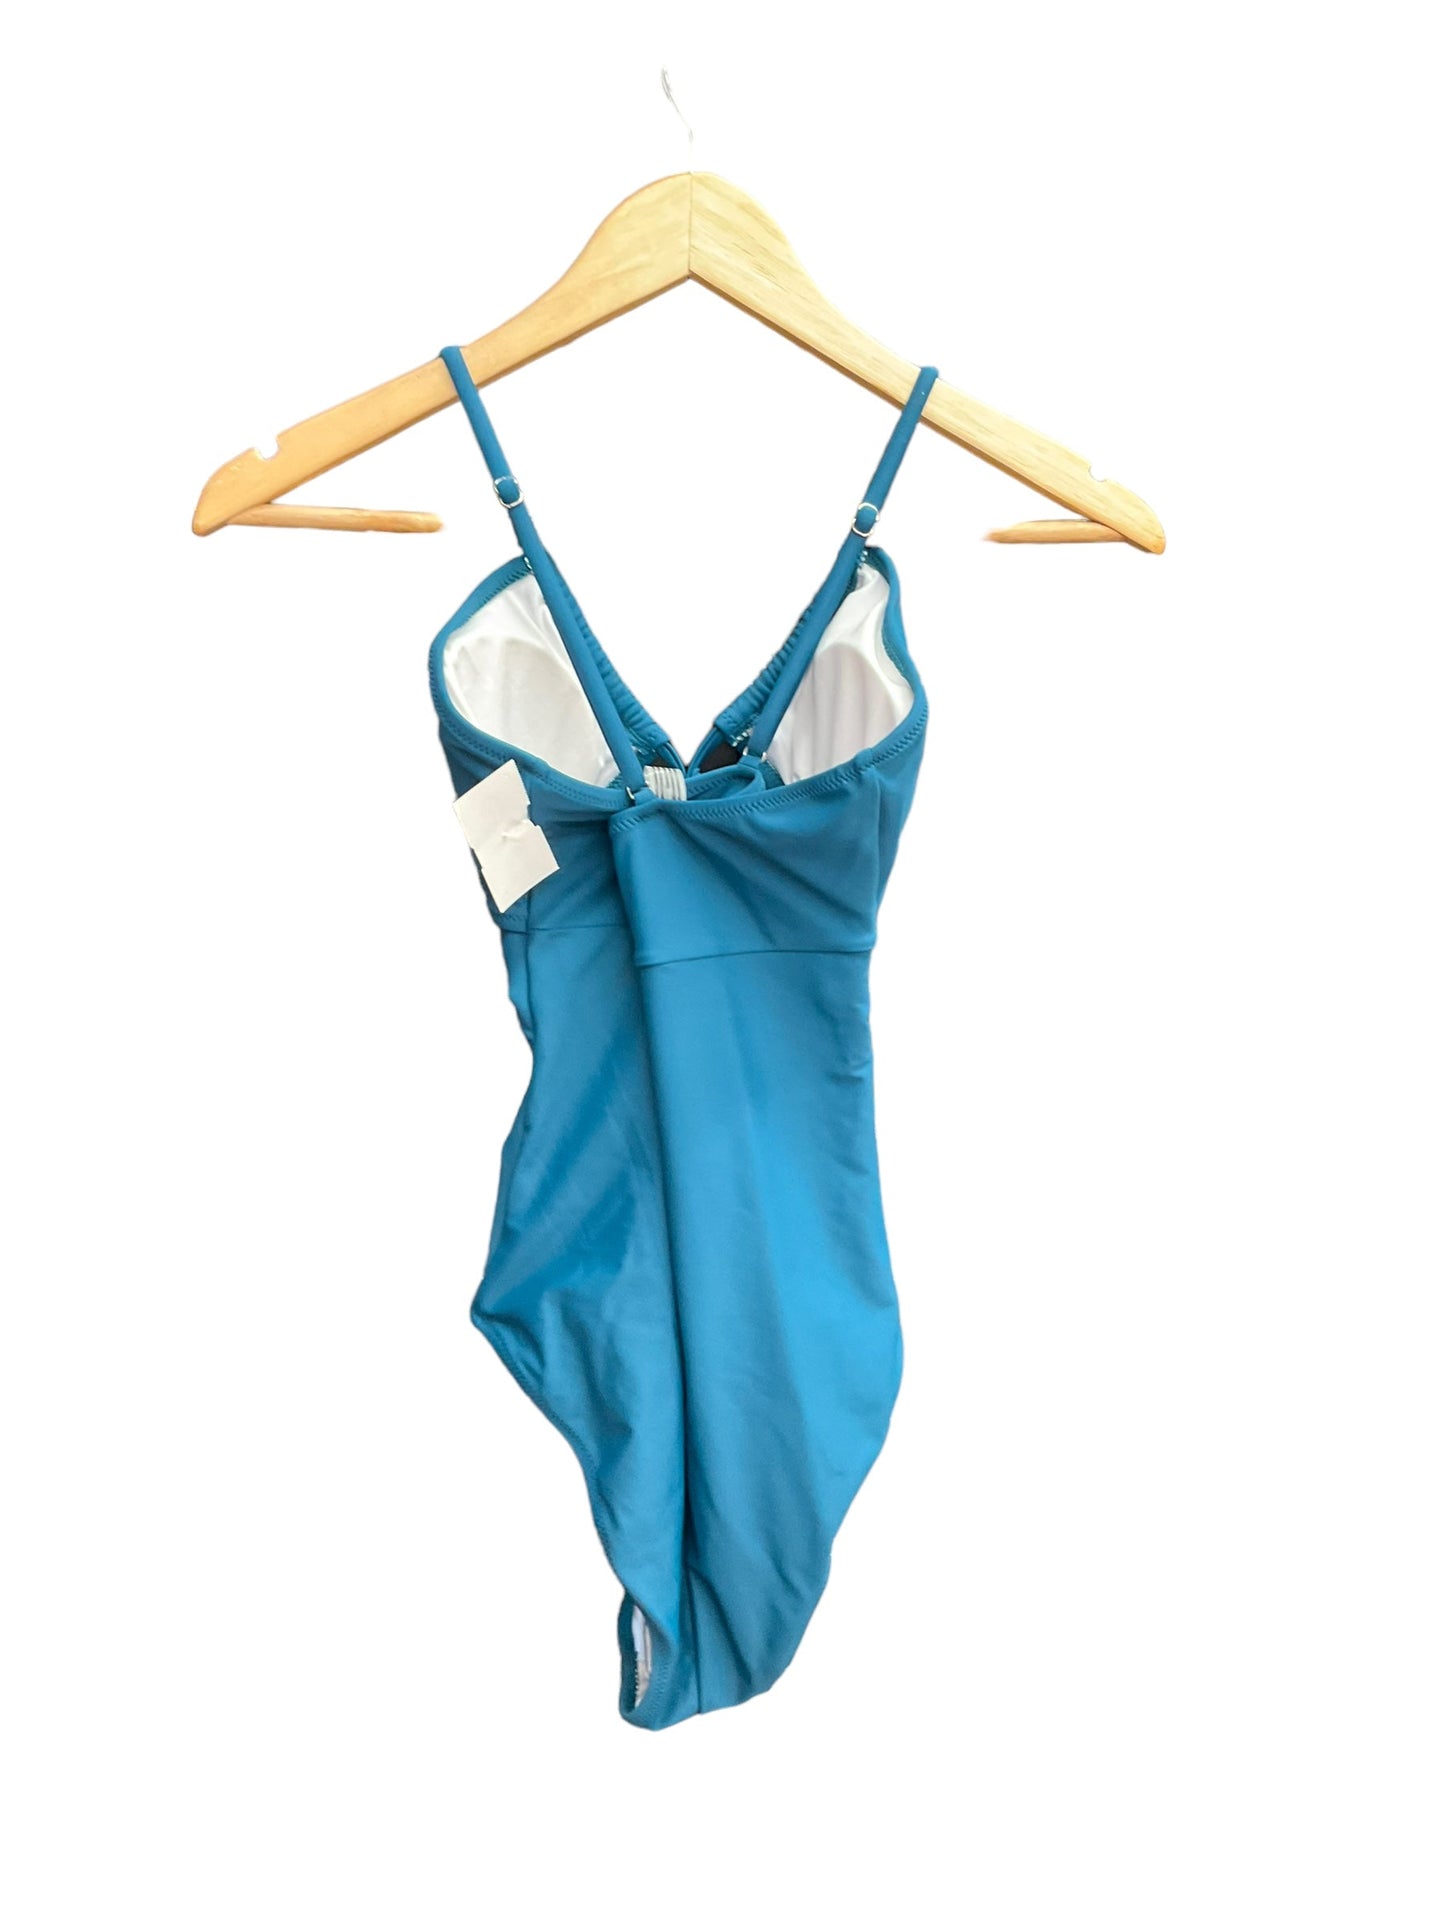 Teal Swimsuit Clothes Mentor, Size S